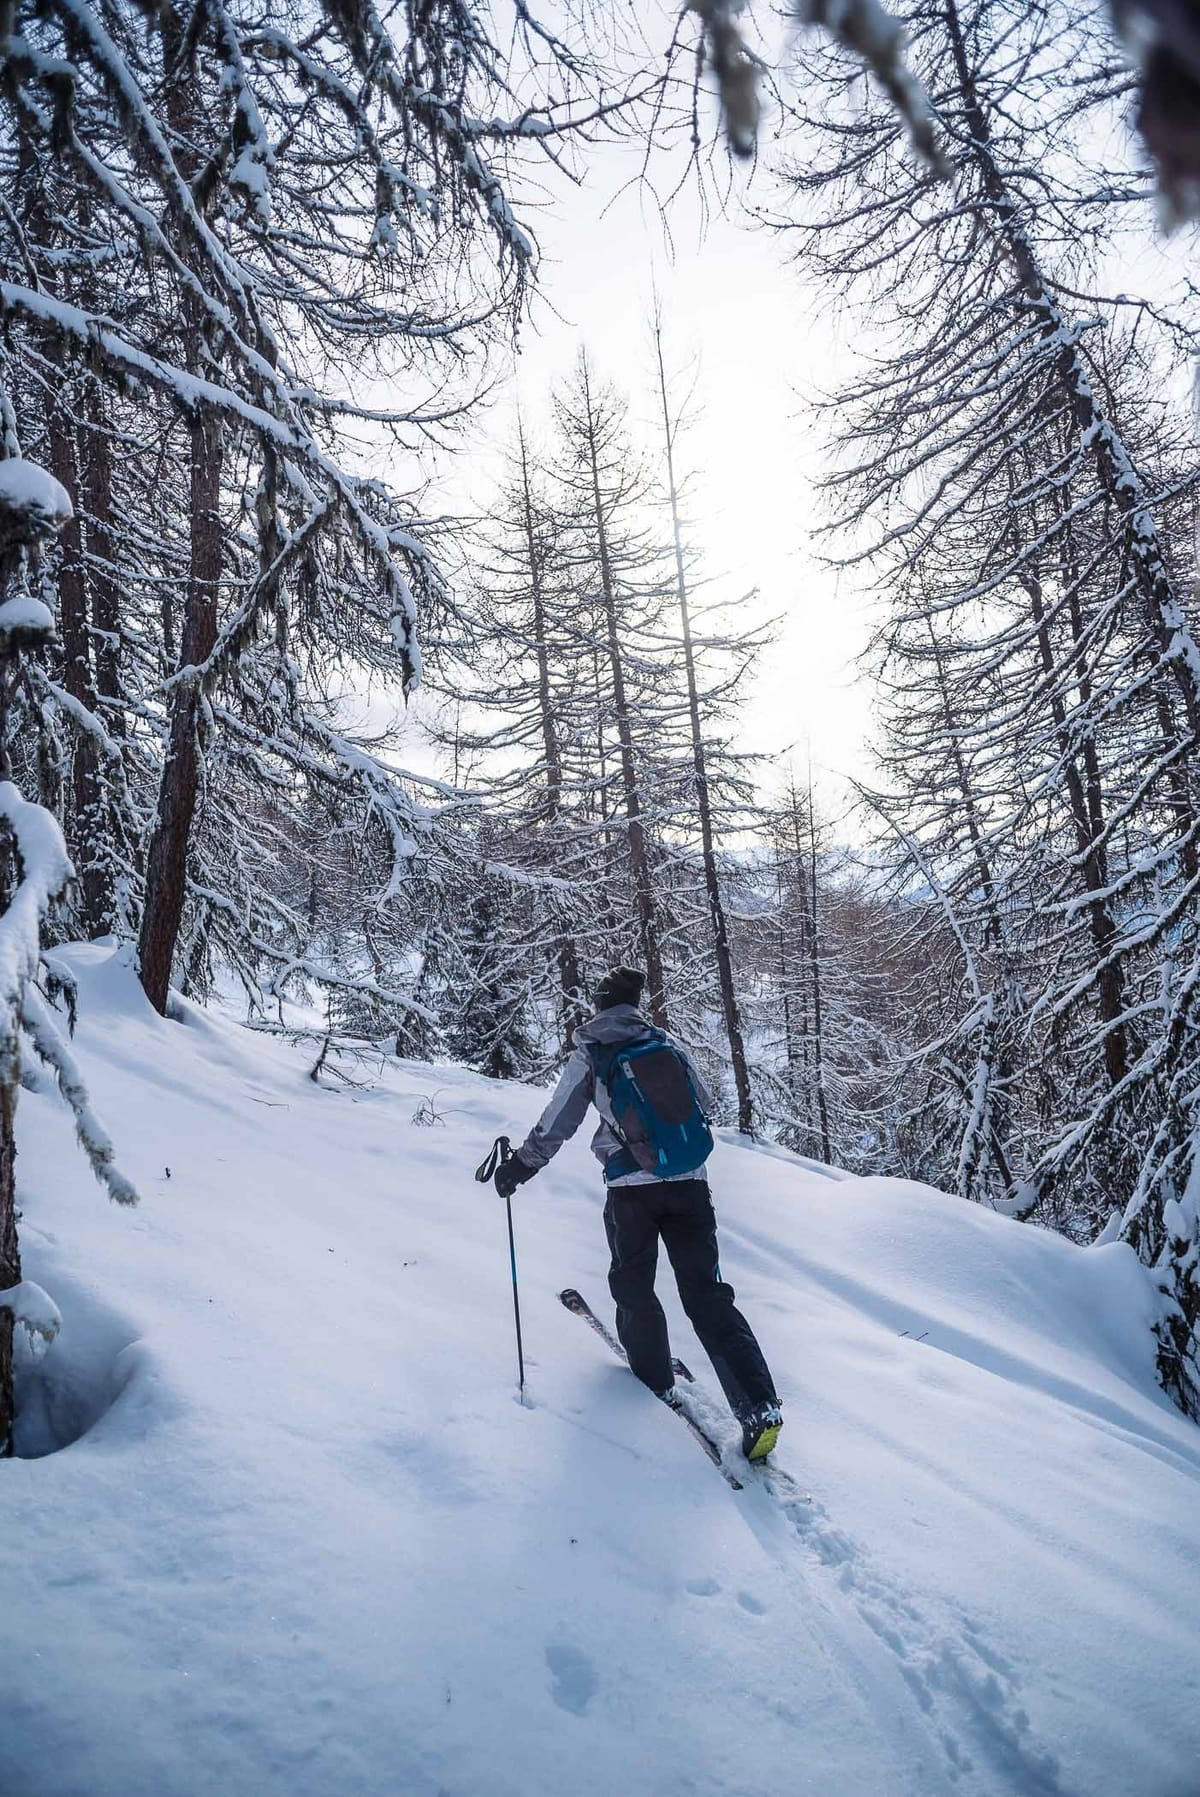 Les Arcs Invites Ski Tourers to Test The Snow a Week Before Opening